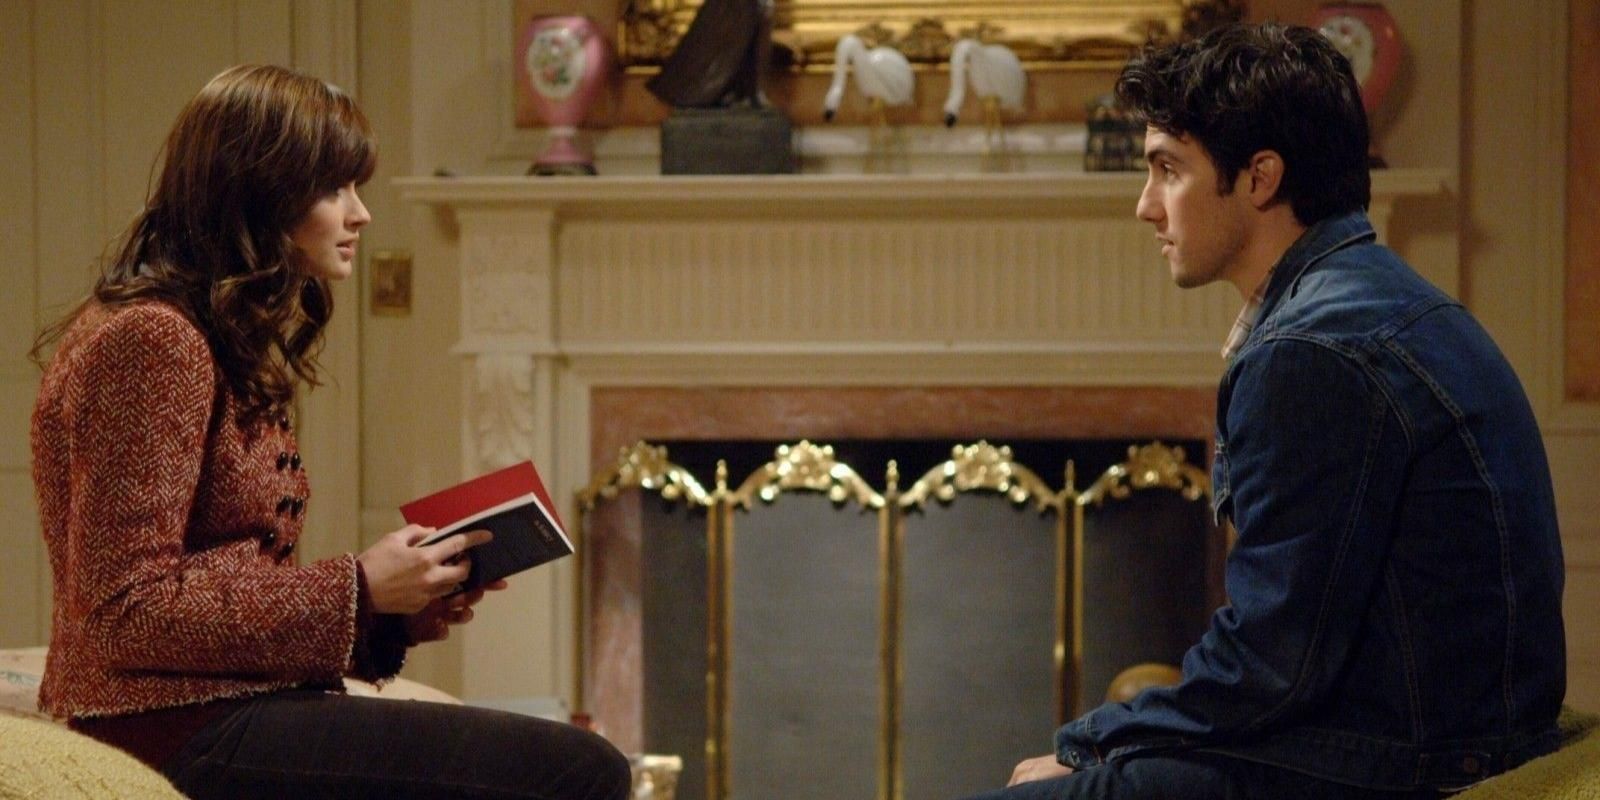 Rory Gilmore talks with Jess Mariano about his book in Gilmore Girls